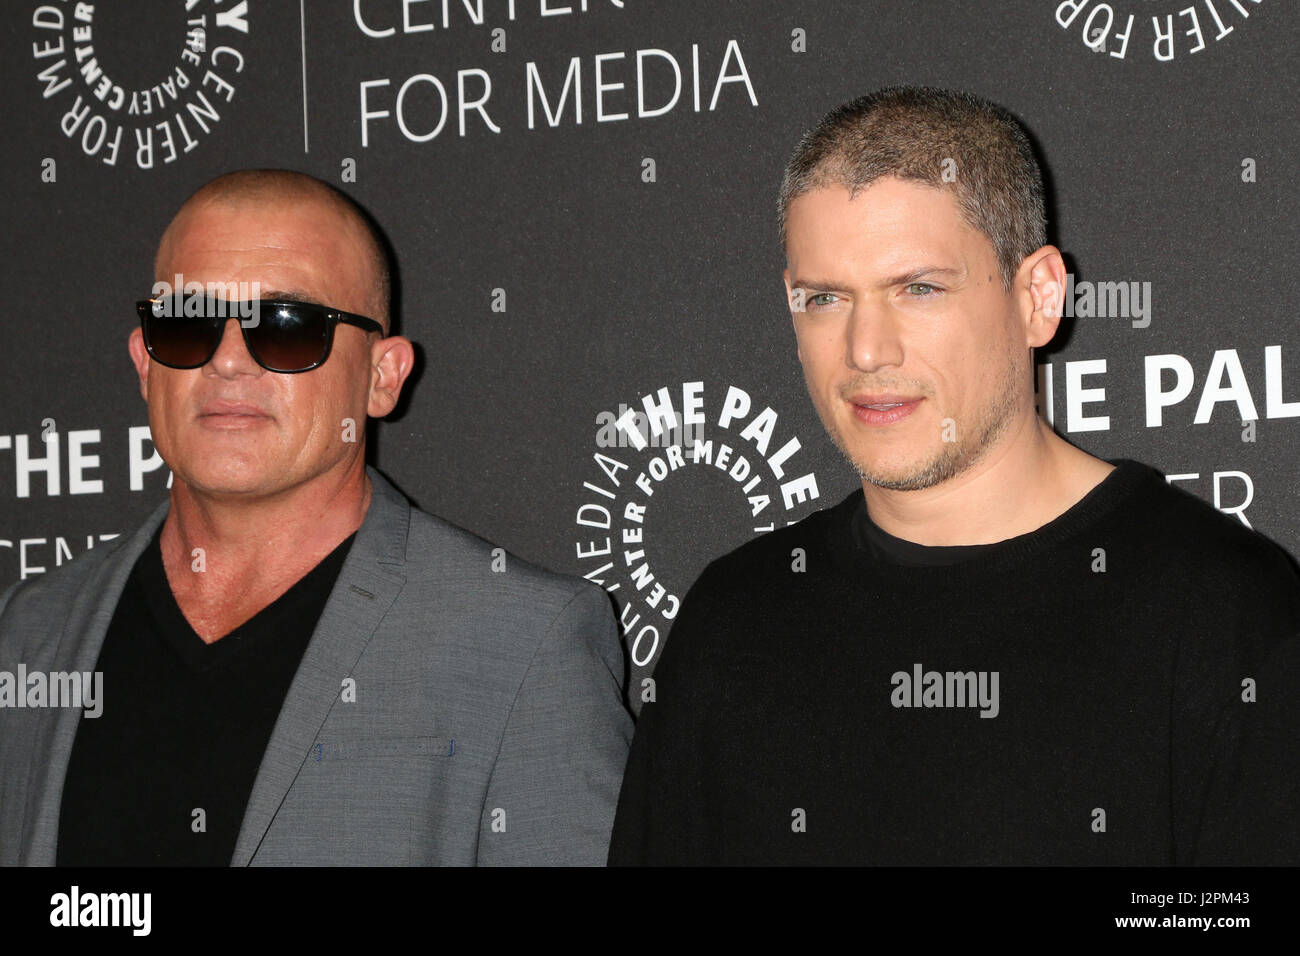 2017 PaleyLive LA Spring Season - 'Prison Break' at the Paley Center for Media - Arrivals  Featuring: Dominic Purcel, Wentworth Miller Where: Beverly Hills, California, United States When: 30 Mar 2017 Credit: Nicky Nelson/WENN.com Stock Photo